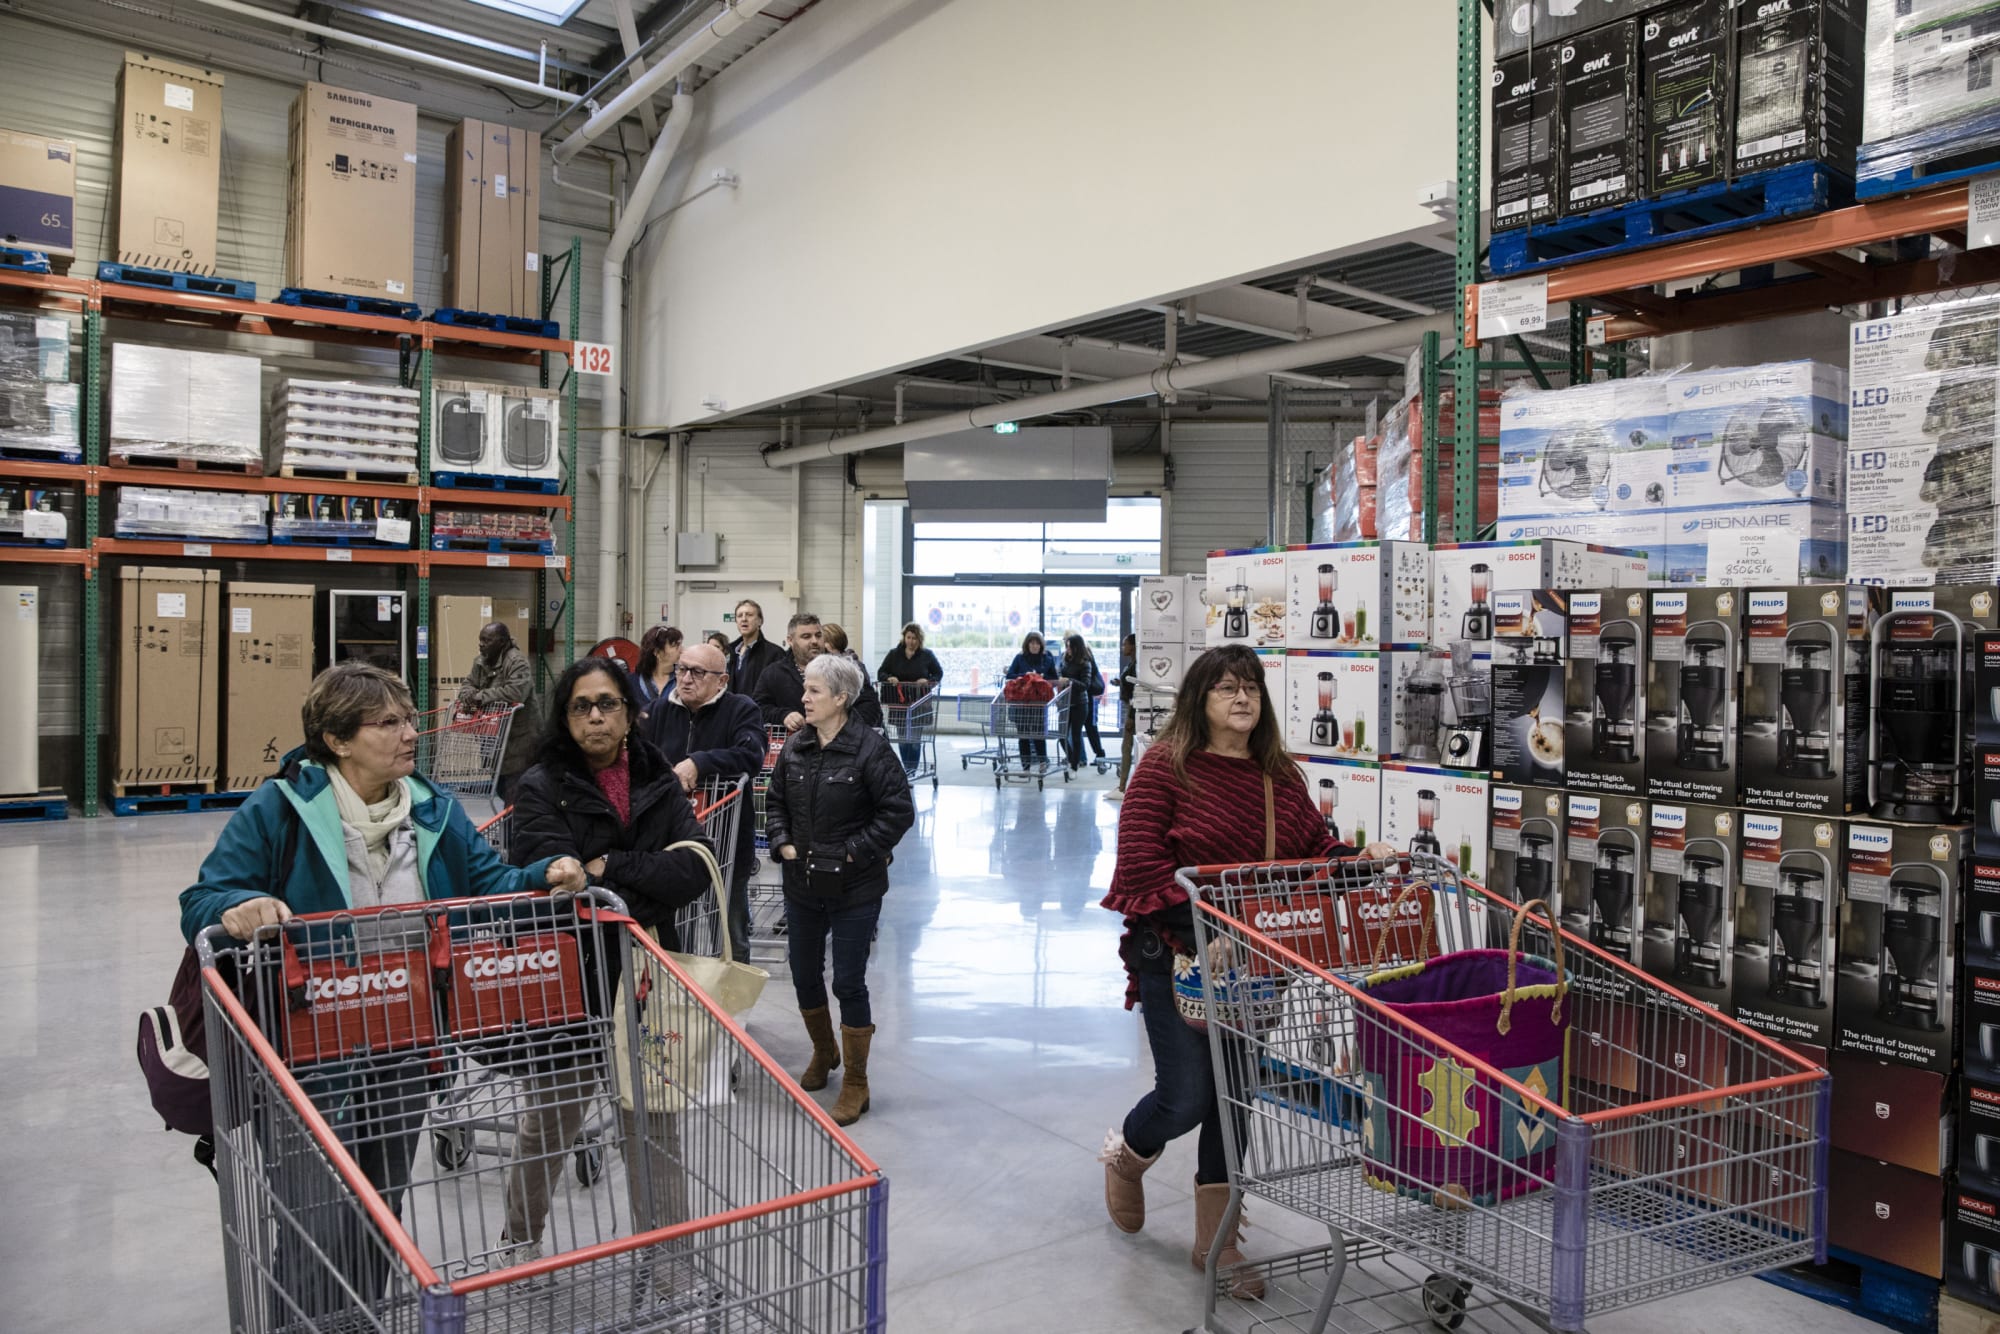 Is Costco open on Memorial Day?